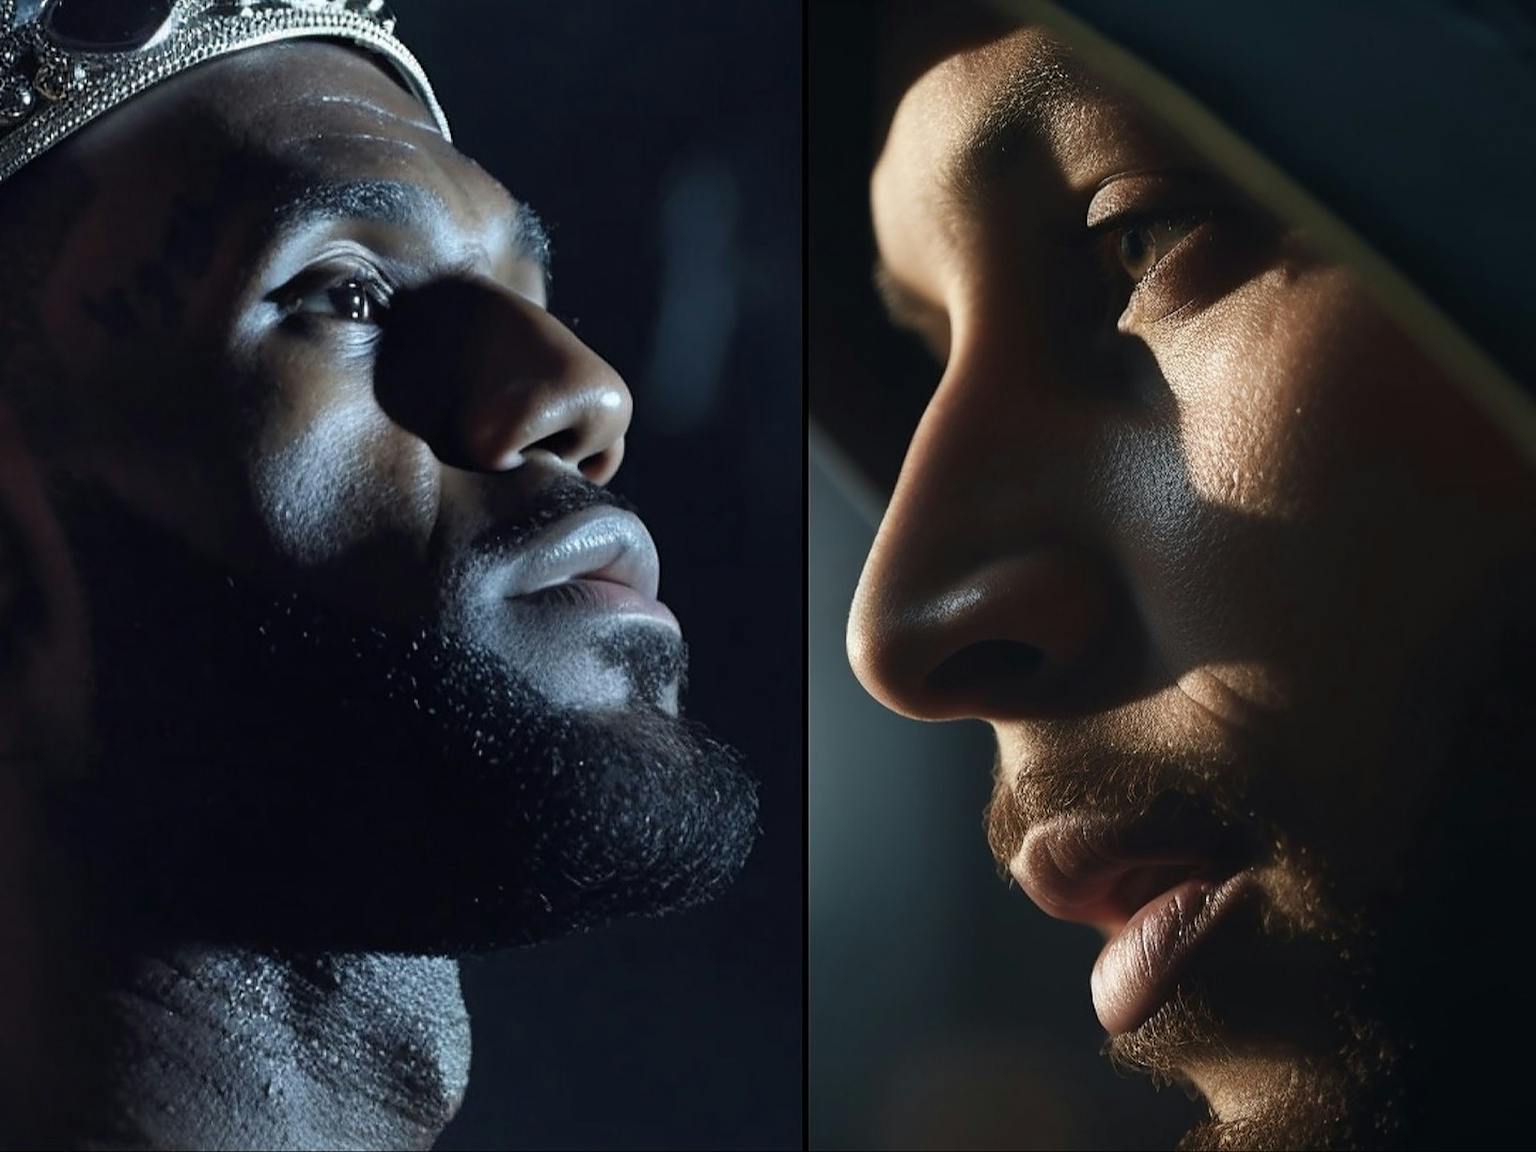 LeBron James and Steph Curry recreated in Midjourney v5.1
